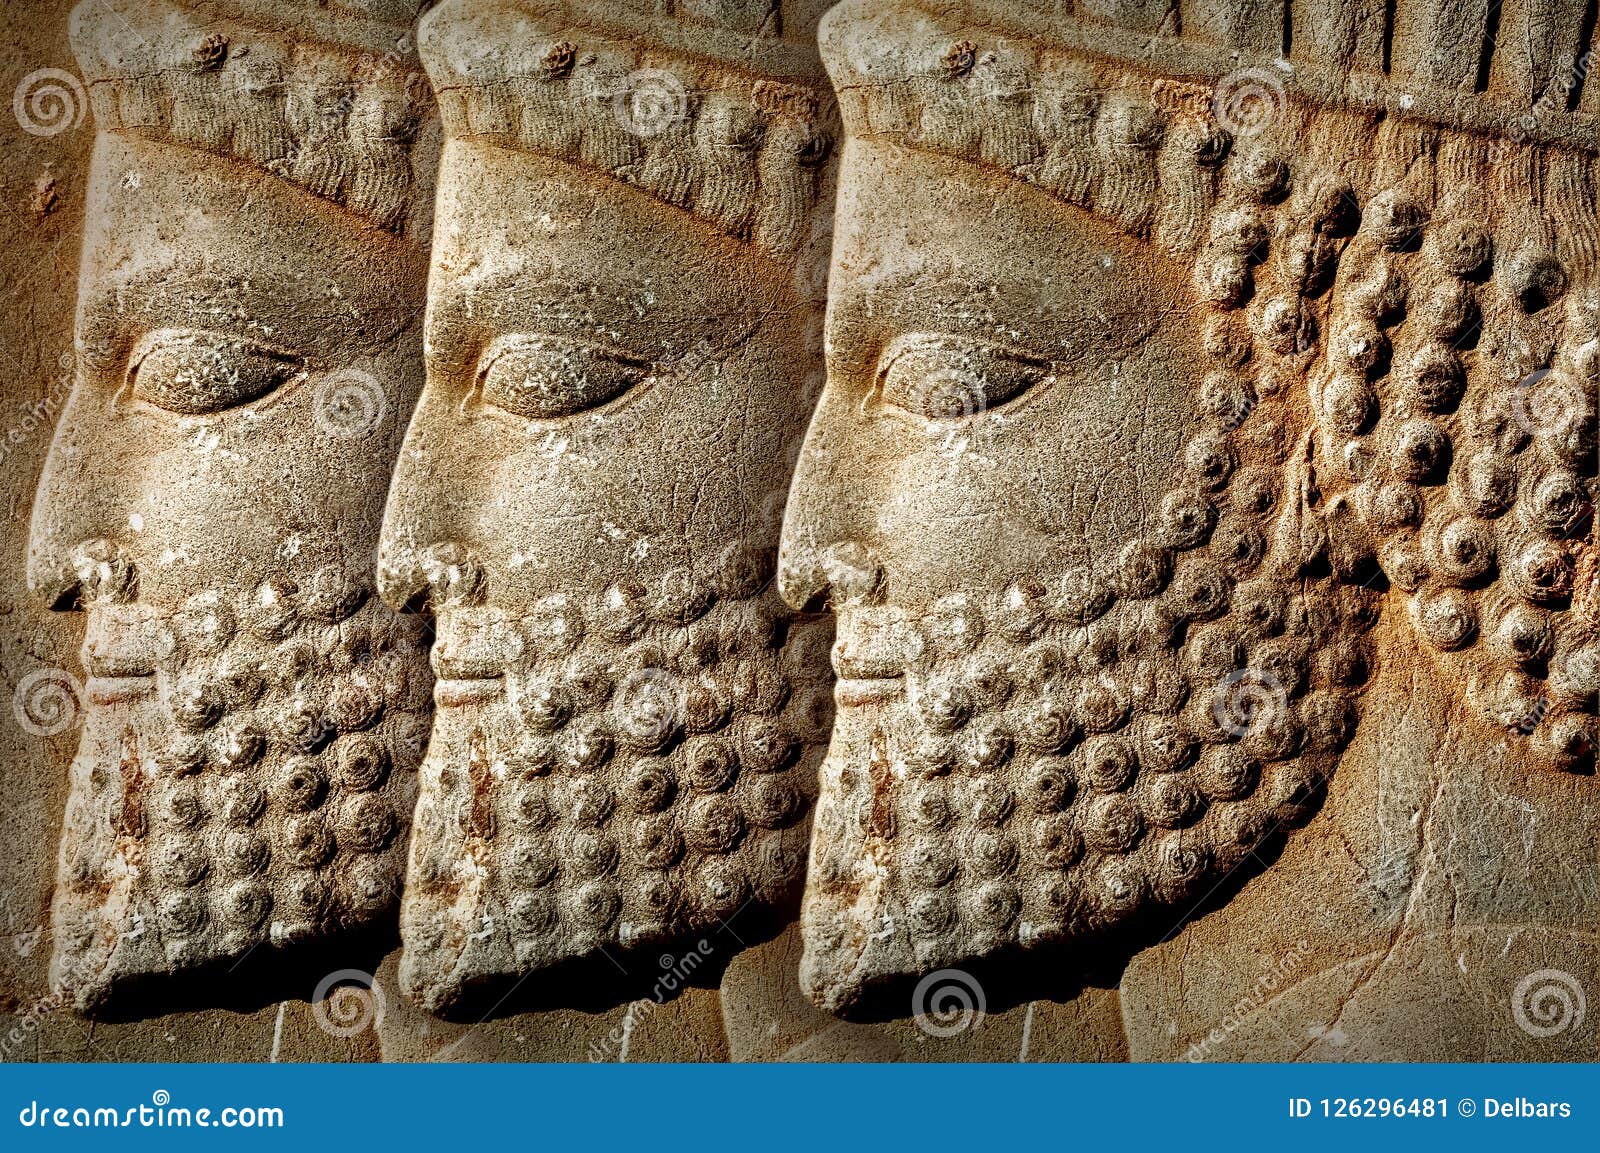 persepolis is the capital of the ancient achaemenid kingdom. iran. ancient persia. bas-relief carved on the walls of old buildings